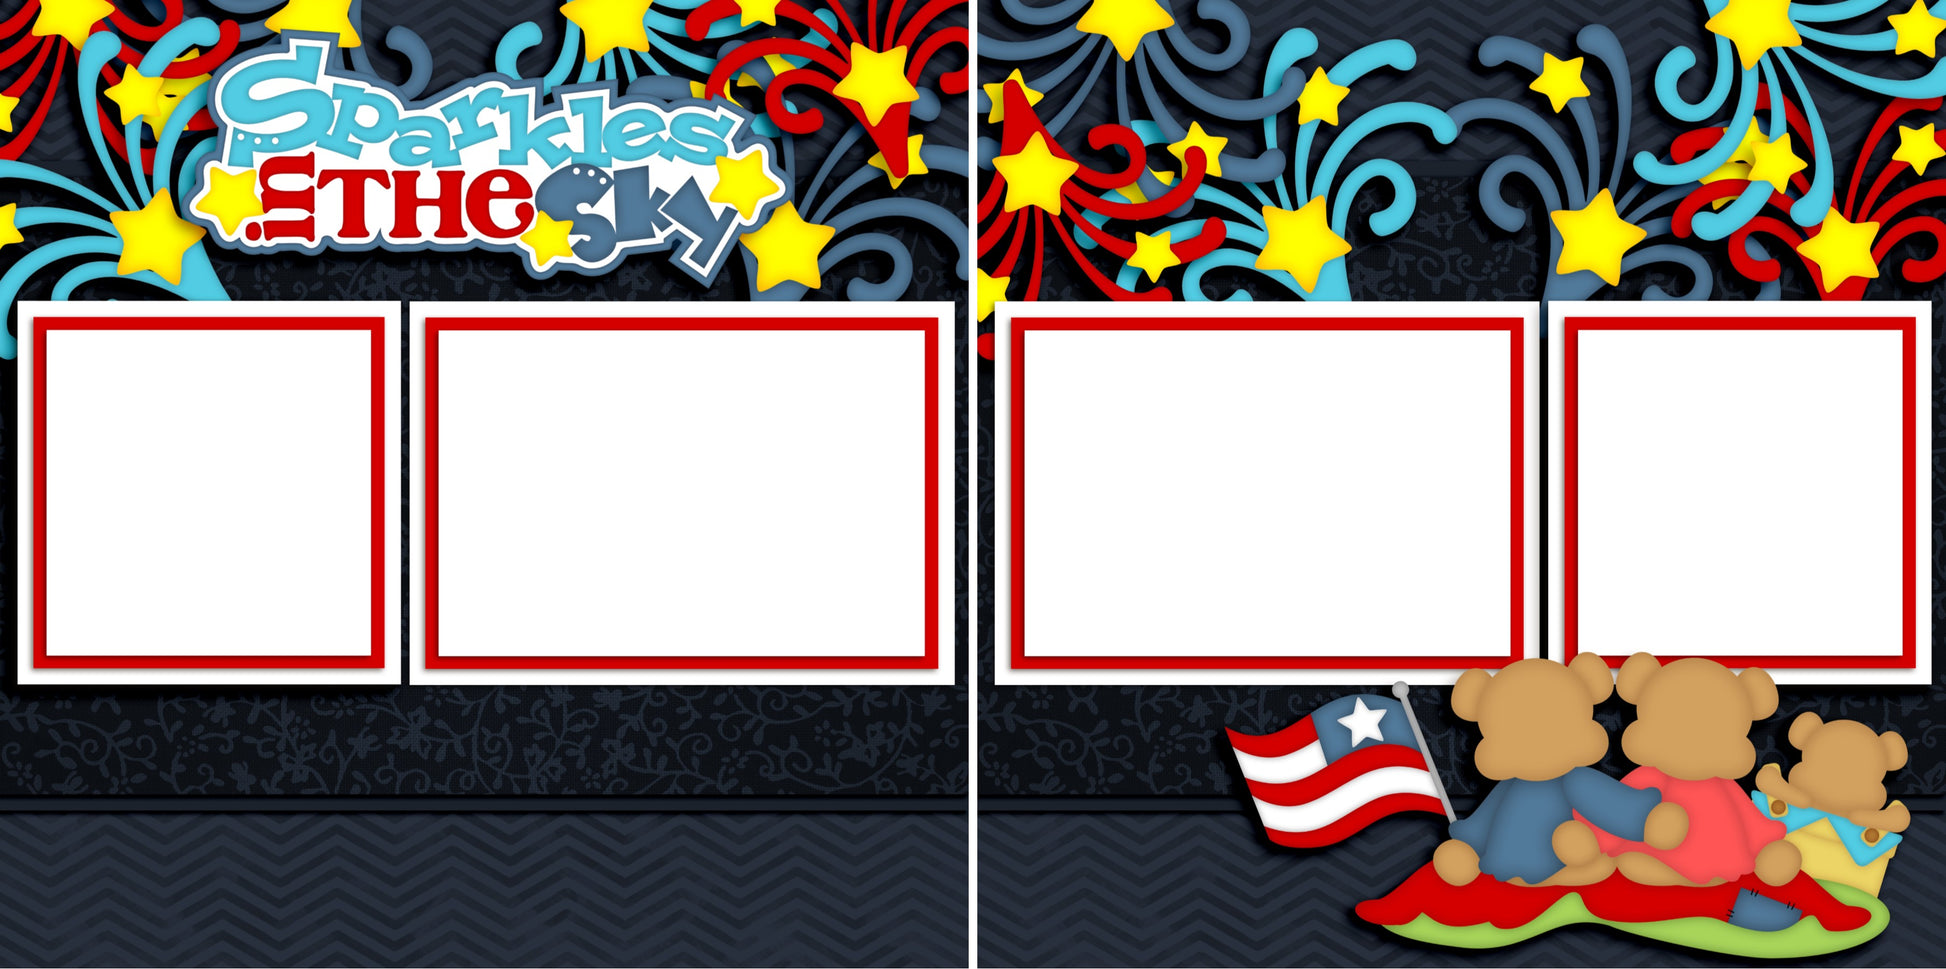 Sparkles in the Sky - Digital Scrapbook Pages - INSTANT DOWNLOAD - EZscrapbooks Scrapbook Layouts July 4th - Patriotic